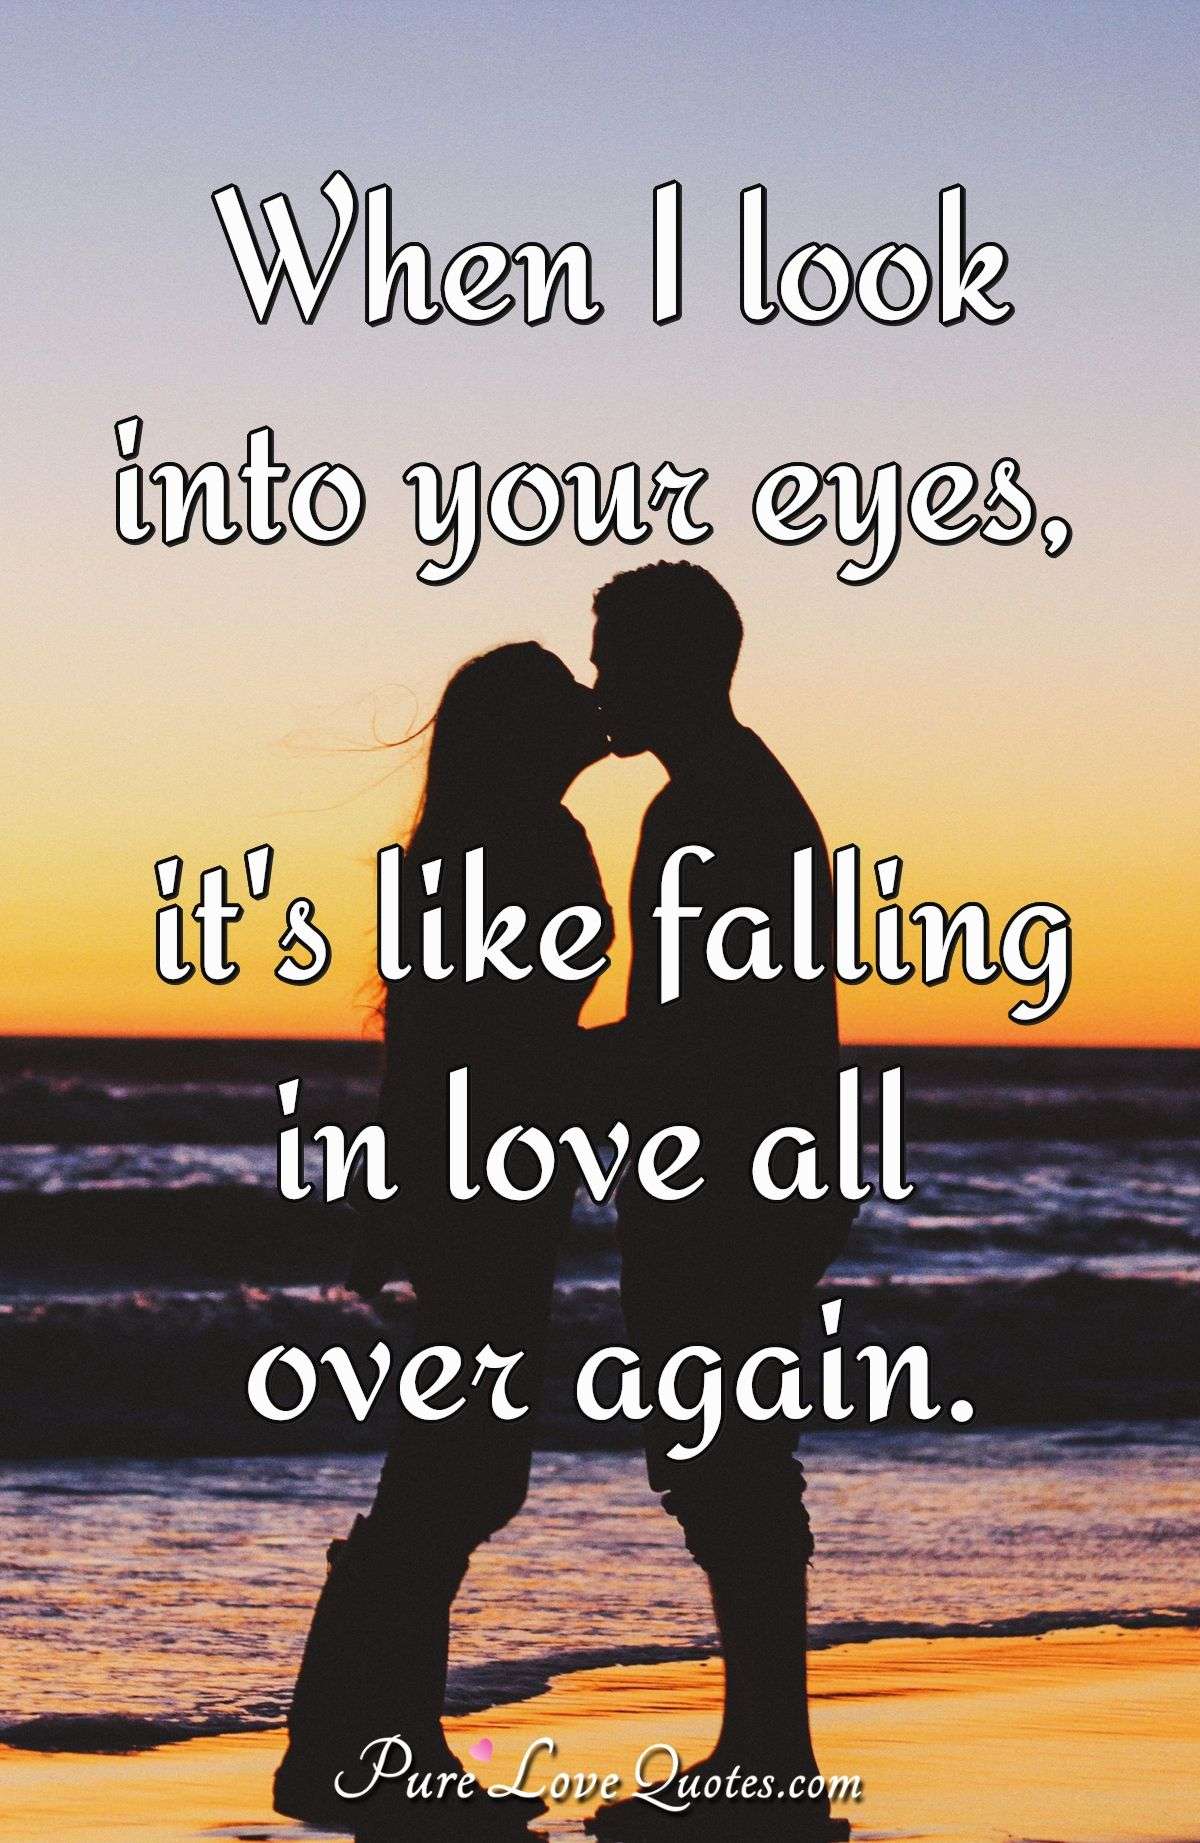 When I Look Into Your Eyes It S Like Falling In Love All Over Again Purelovequotes